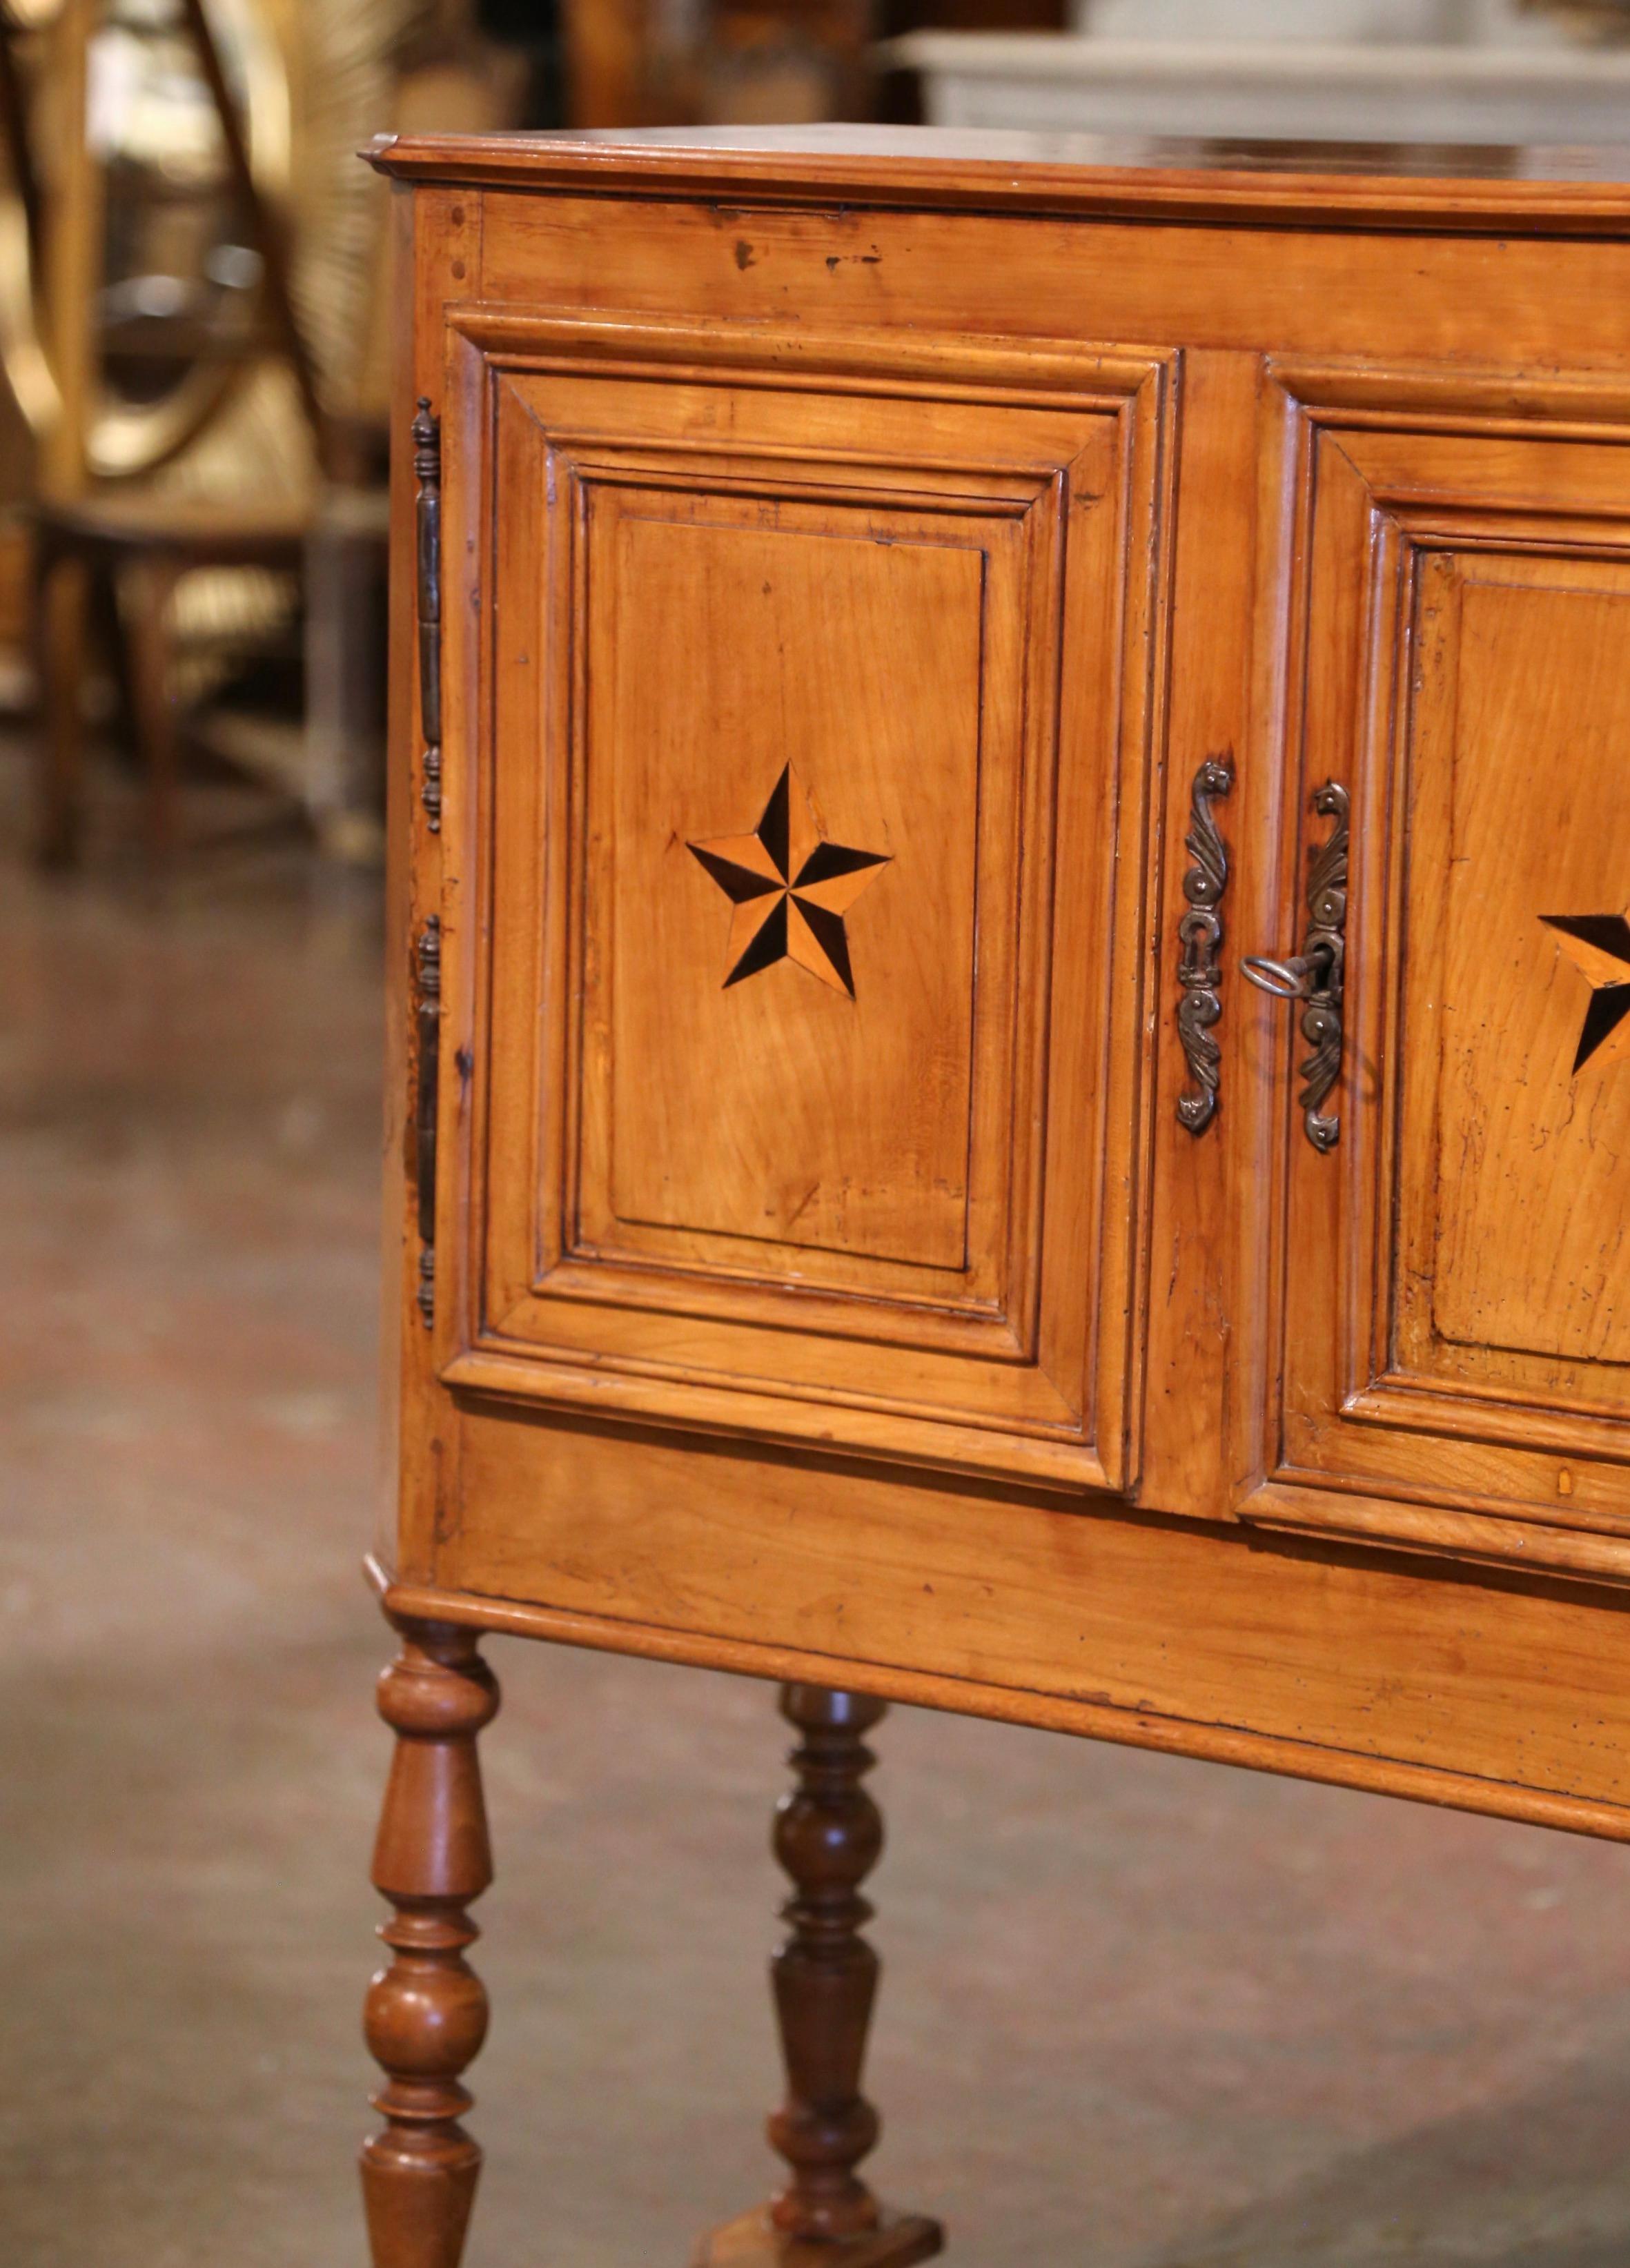 This elegant antique cabinet was crafted in the Poitou region of France circa 1820. Built of cherry wood and oak wood, the buffet stands on turned legs ending with a cross stretcher at the base. The cabinet features two doors decorated with inlaid